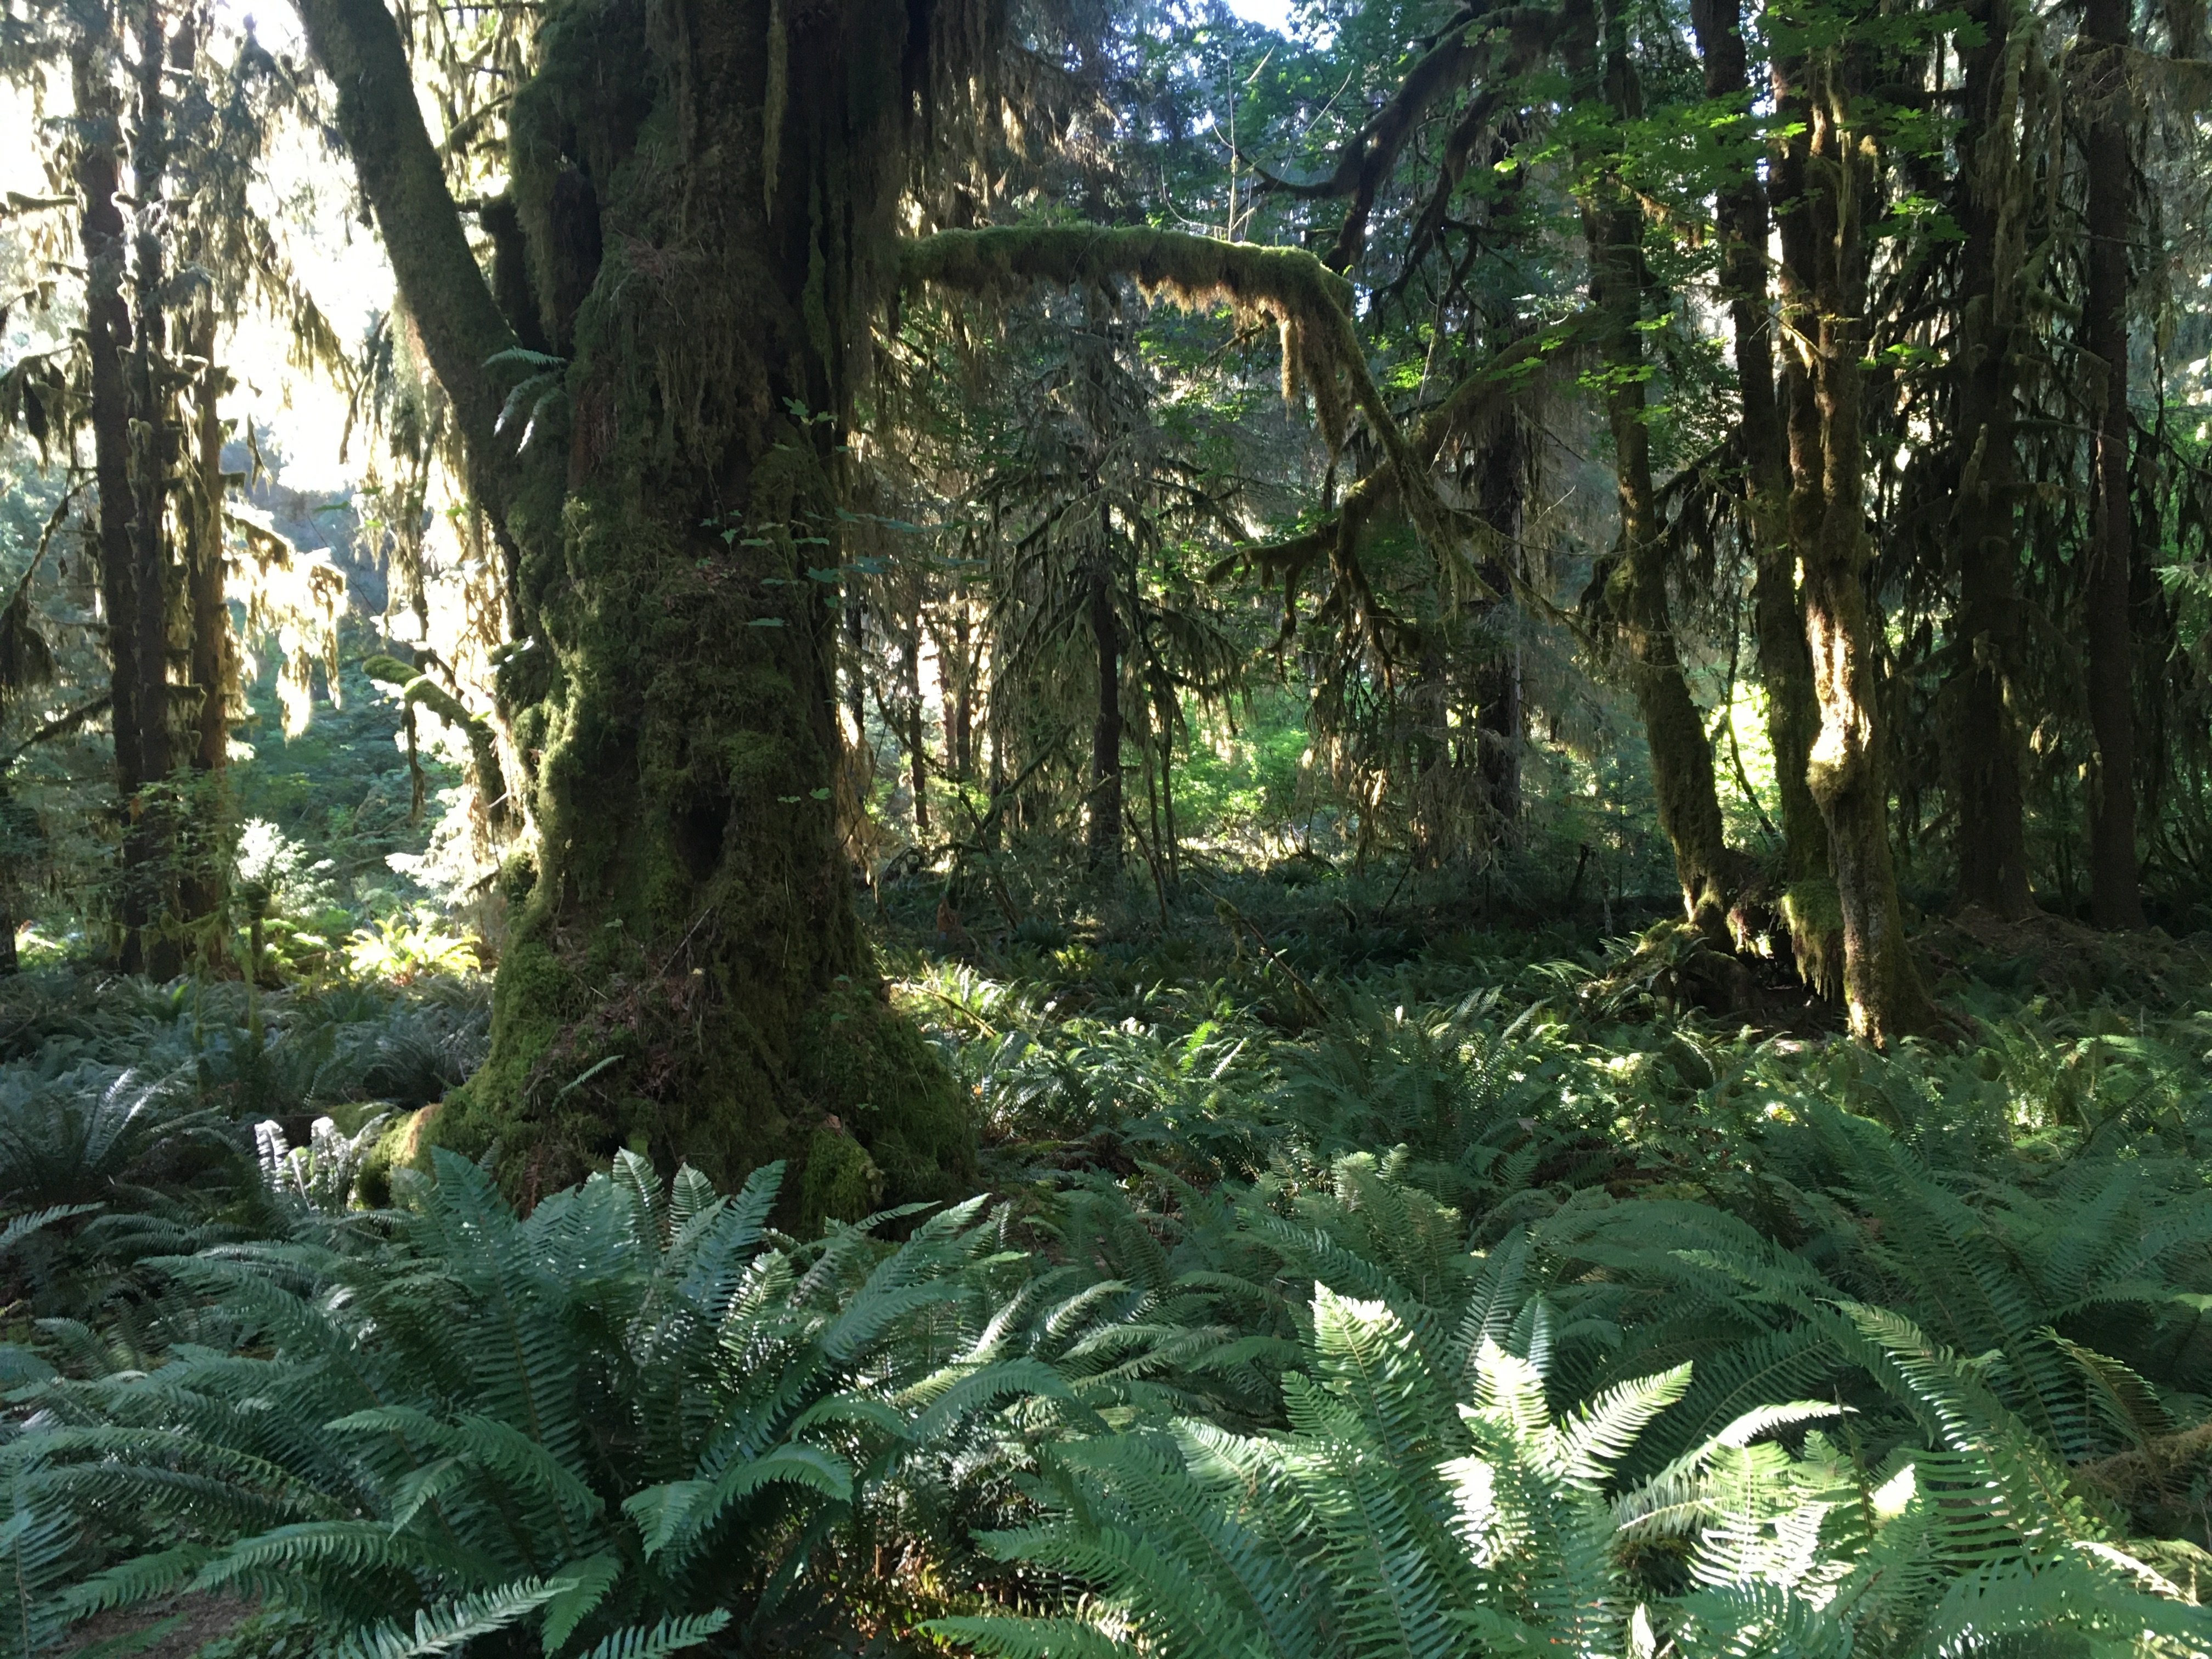 Still more rainforest.  Big trees hang with moss and the forest floor is covered with ferns